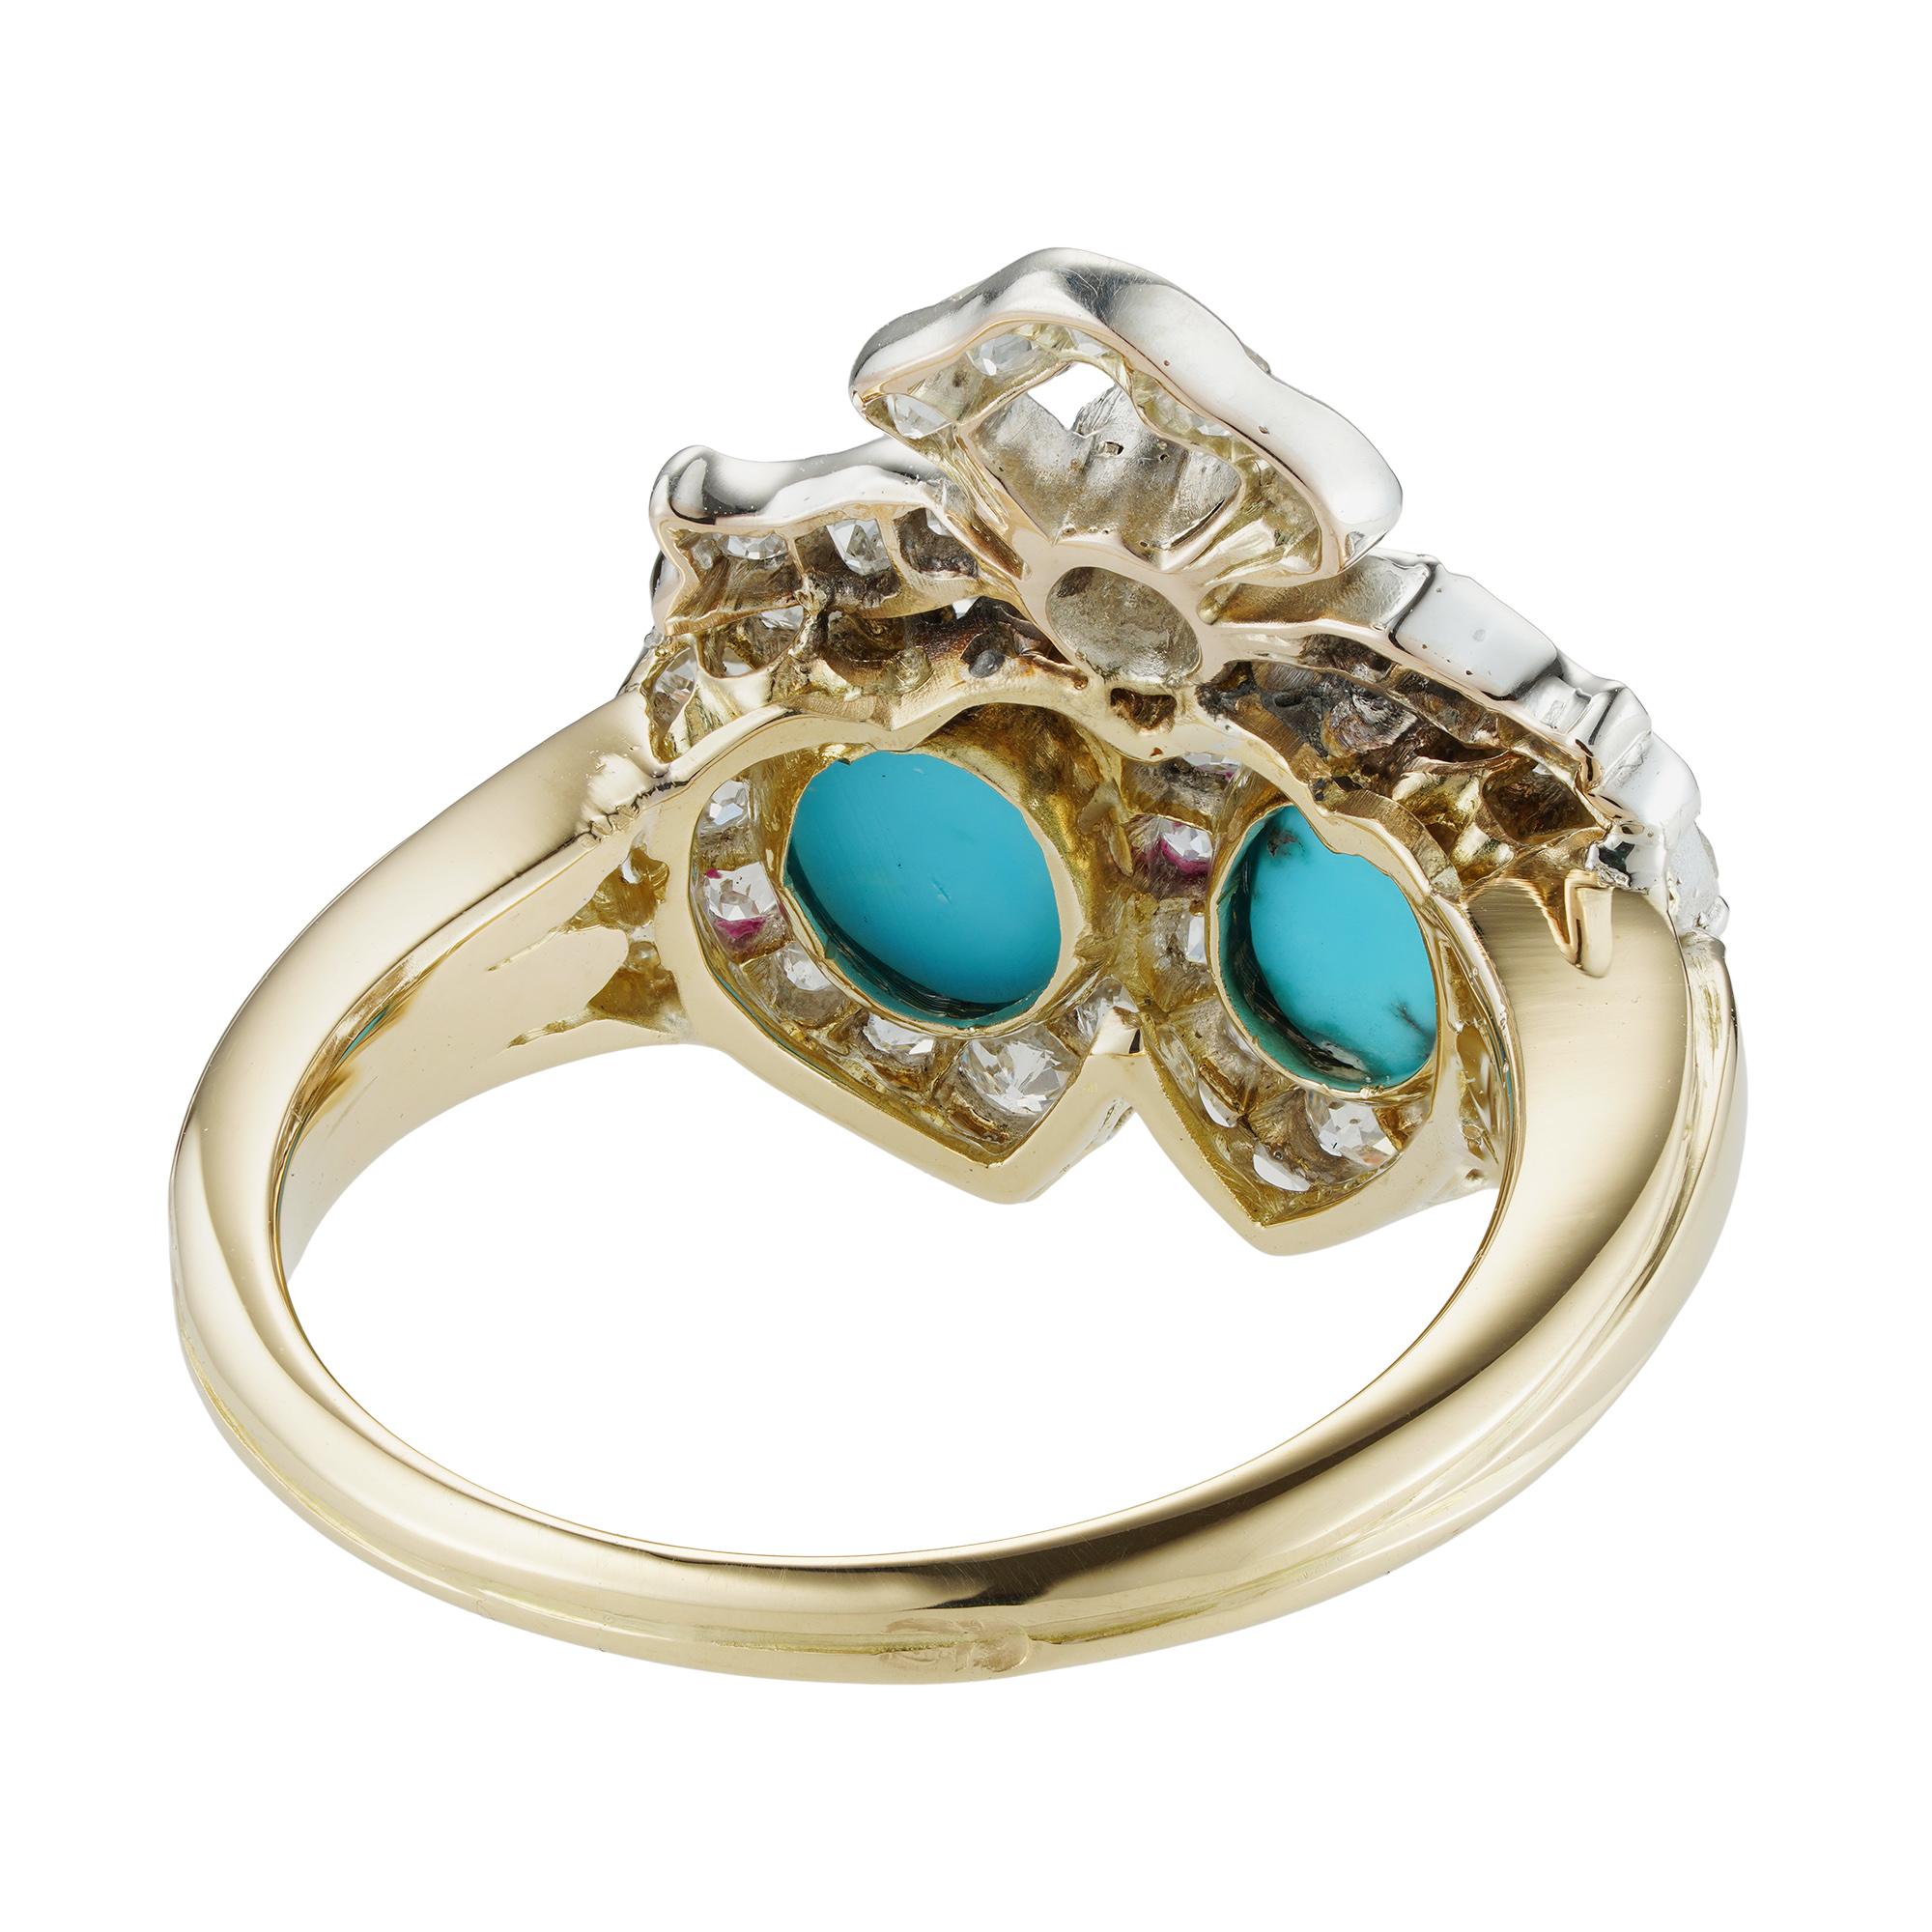 A Victorian turquoise and diamond double heart ring, the two cabochon-cut turquoise each surrounded by an old-cut diamond-set frame, with diamond-set bow top, the diamonds estimated to weigh 0.75 carats in total, all set in silver, to yellow gold